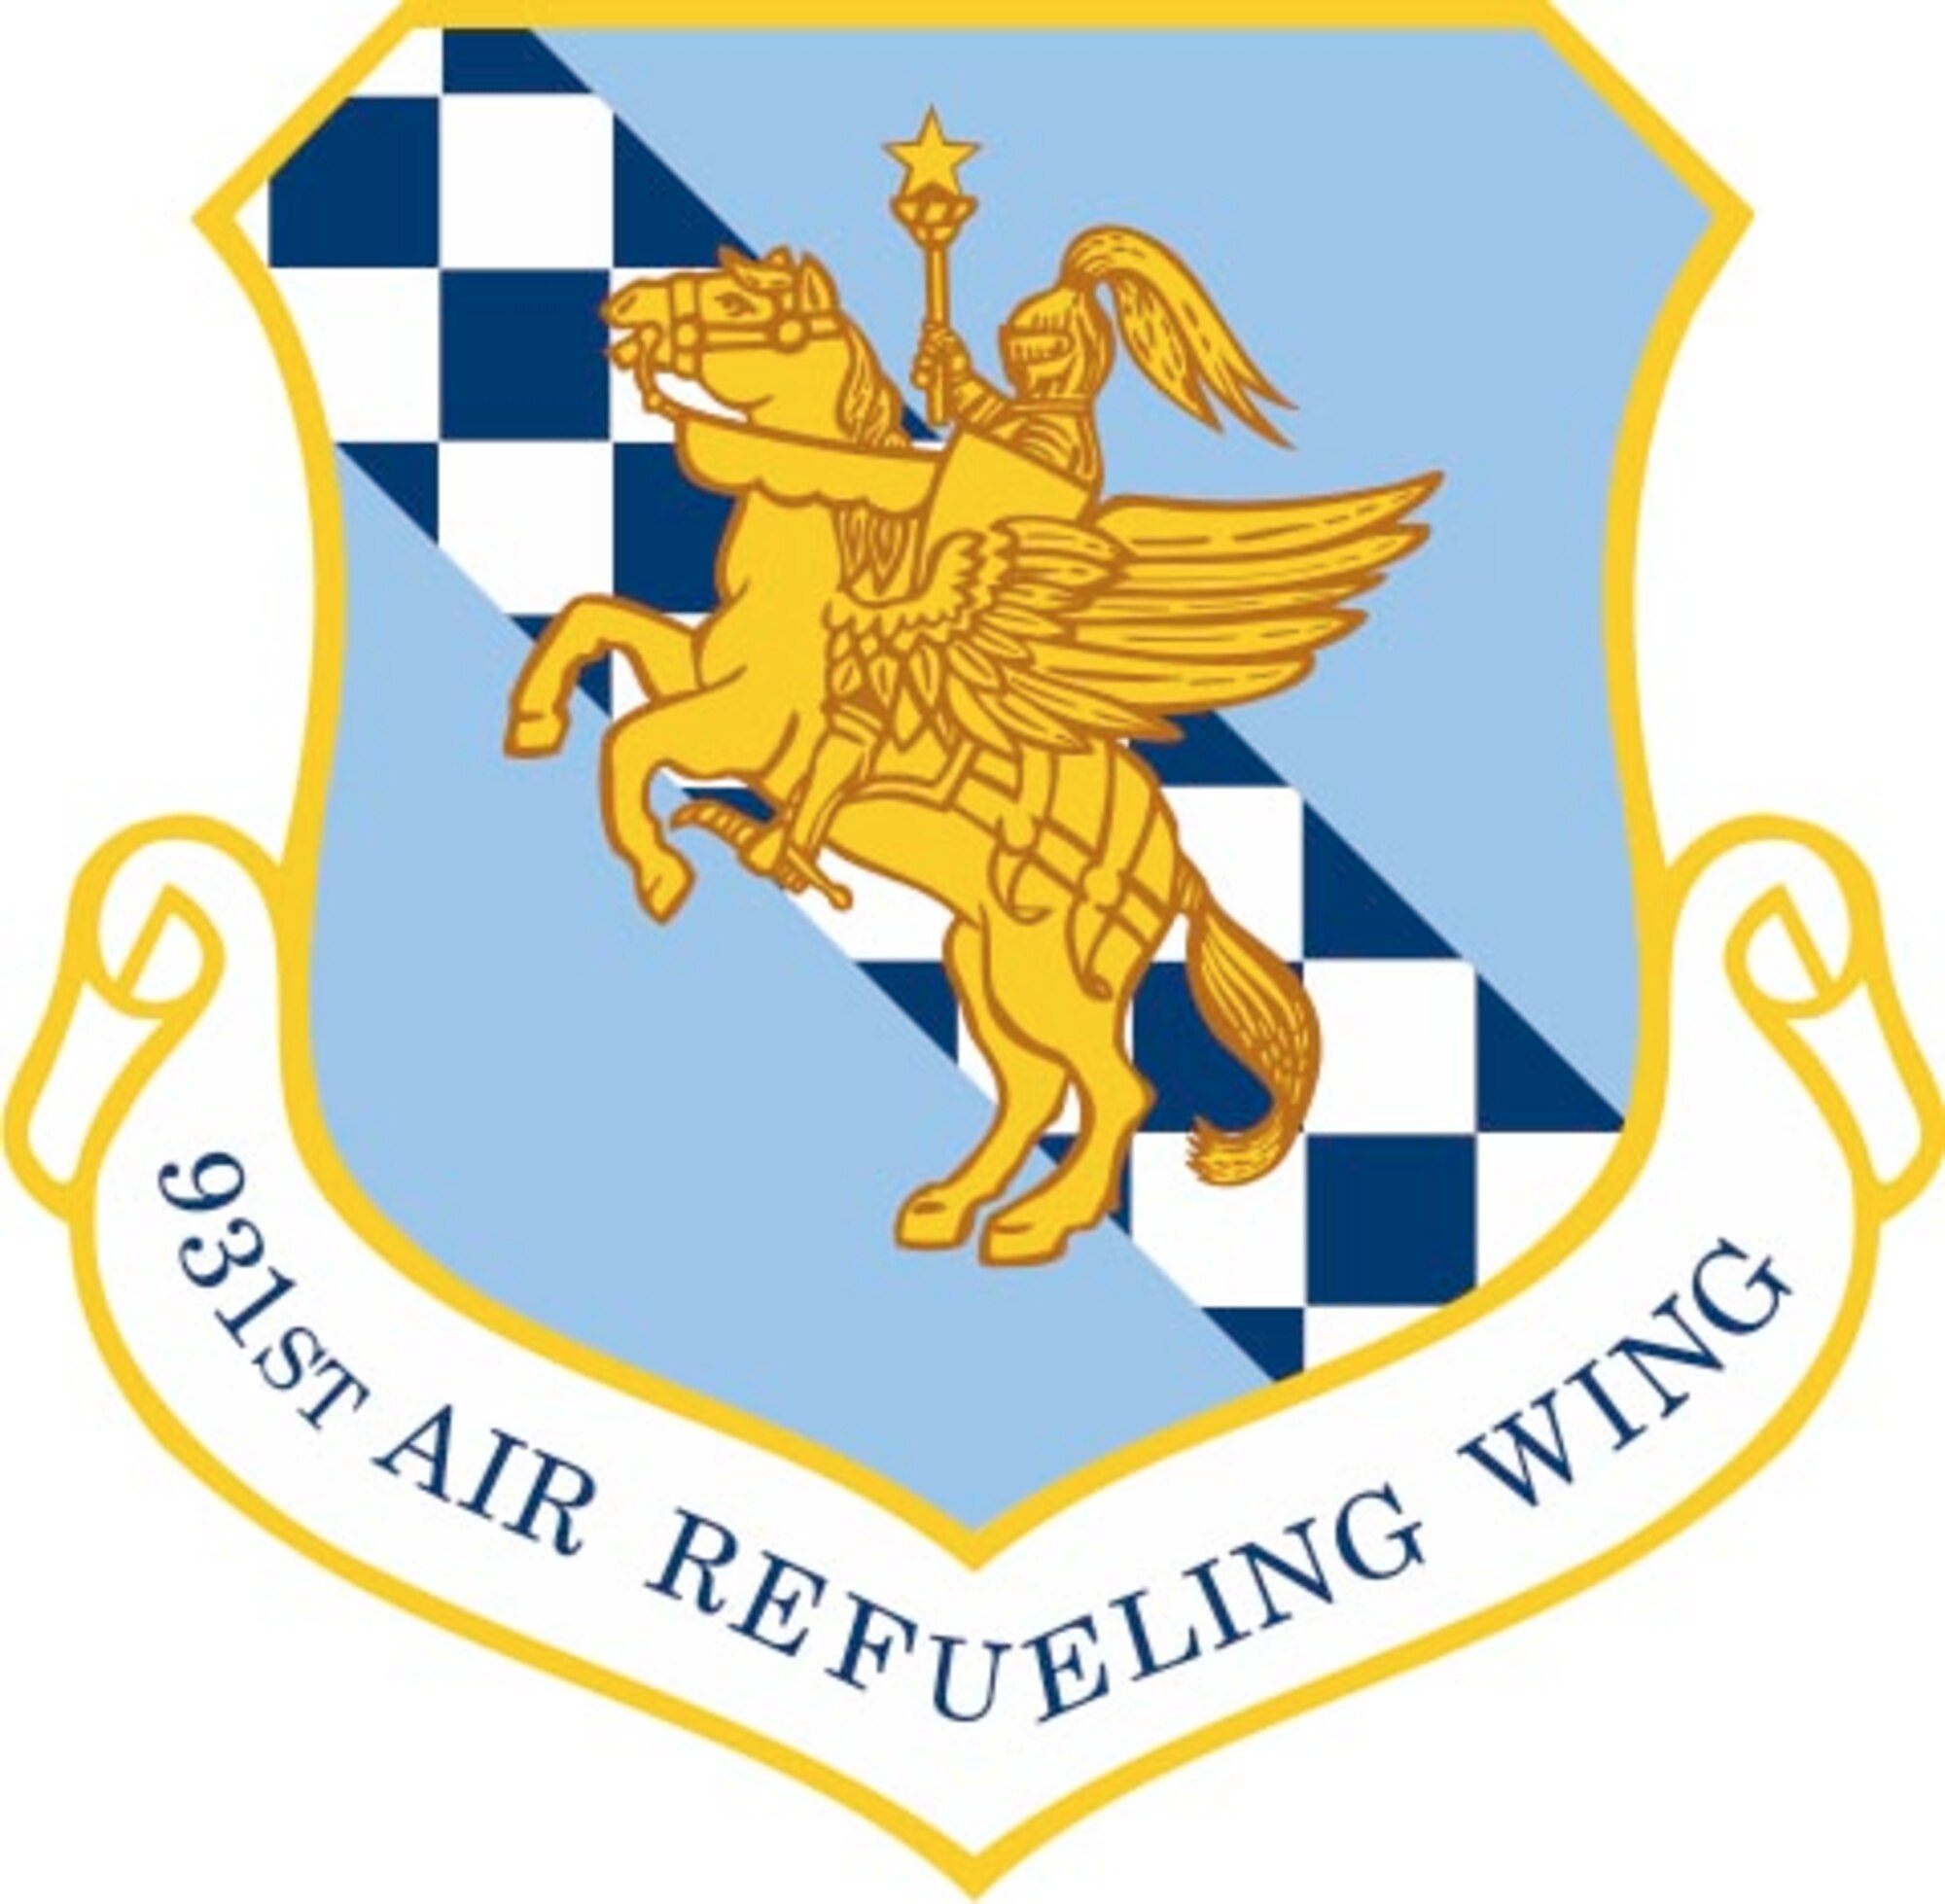 The 931st Air Refueling Wing logo.